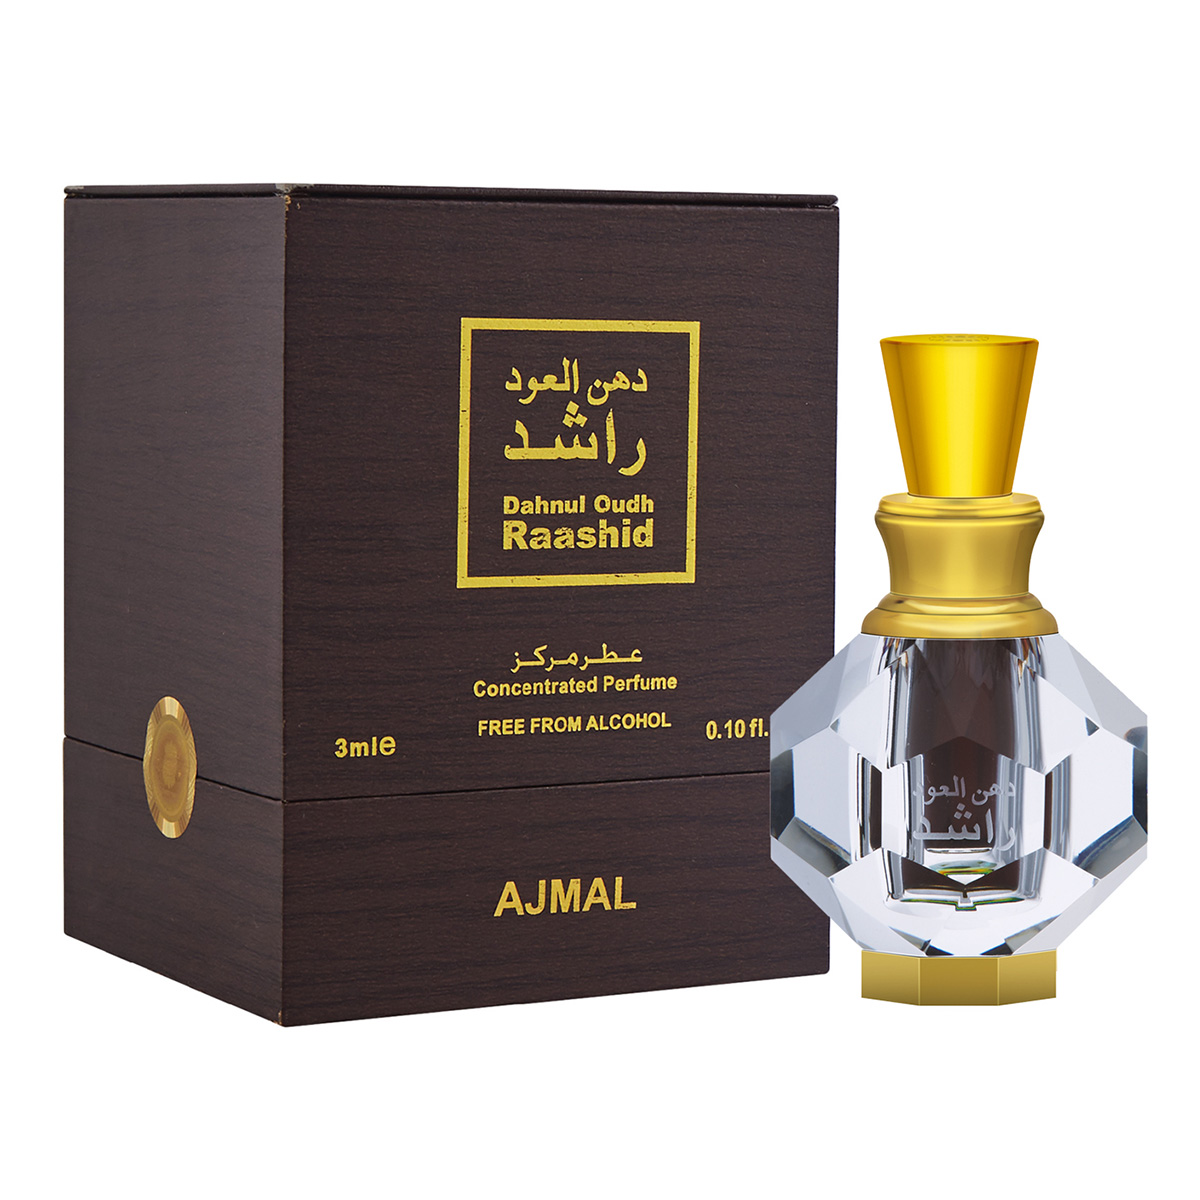 Ajmal Dahnul Oudh Raashid Concentrated Perfume Free From Alcohol, 3ml